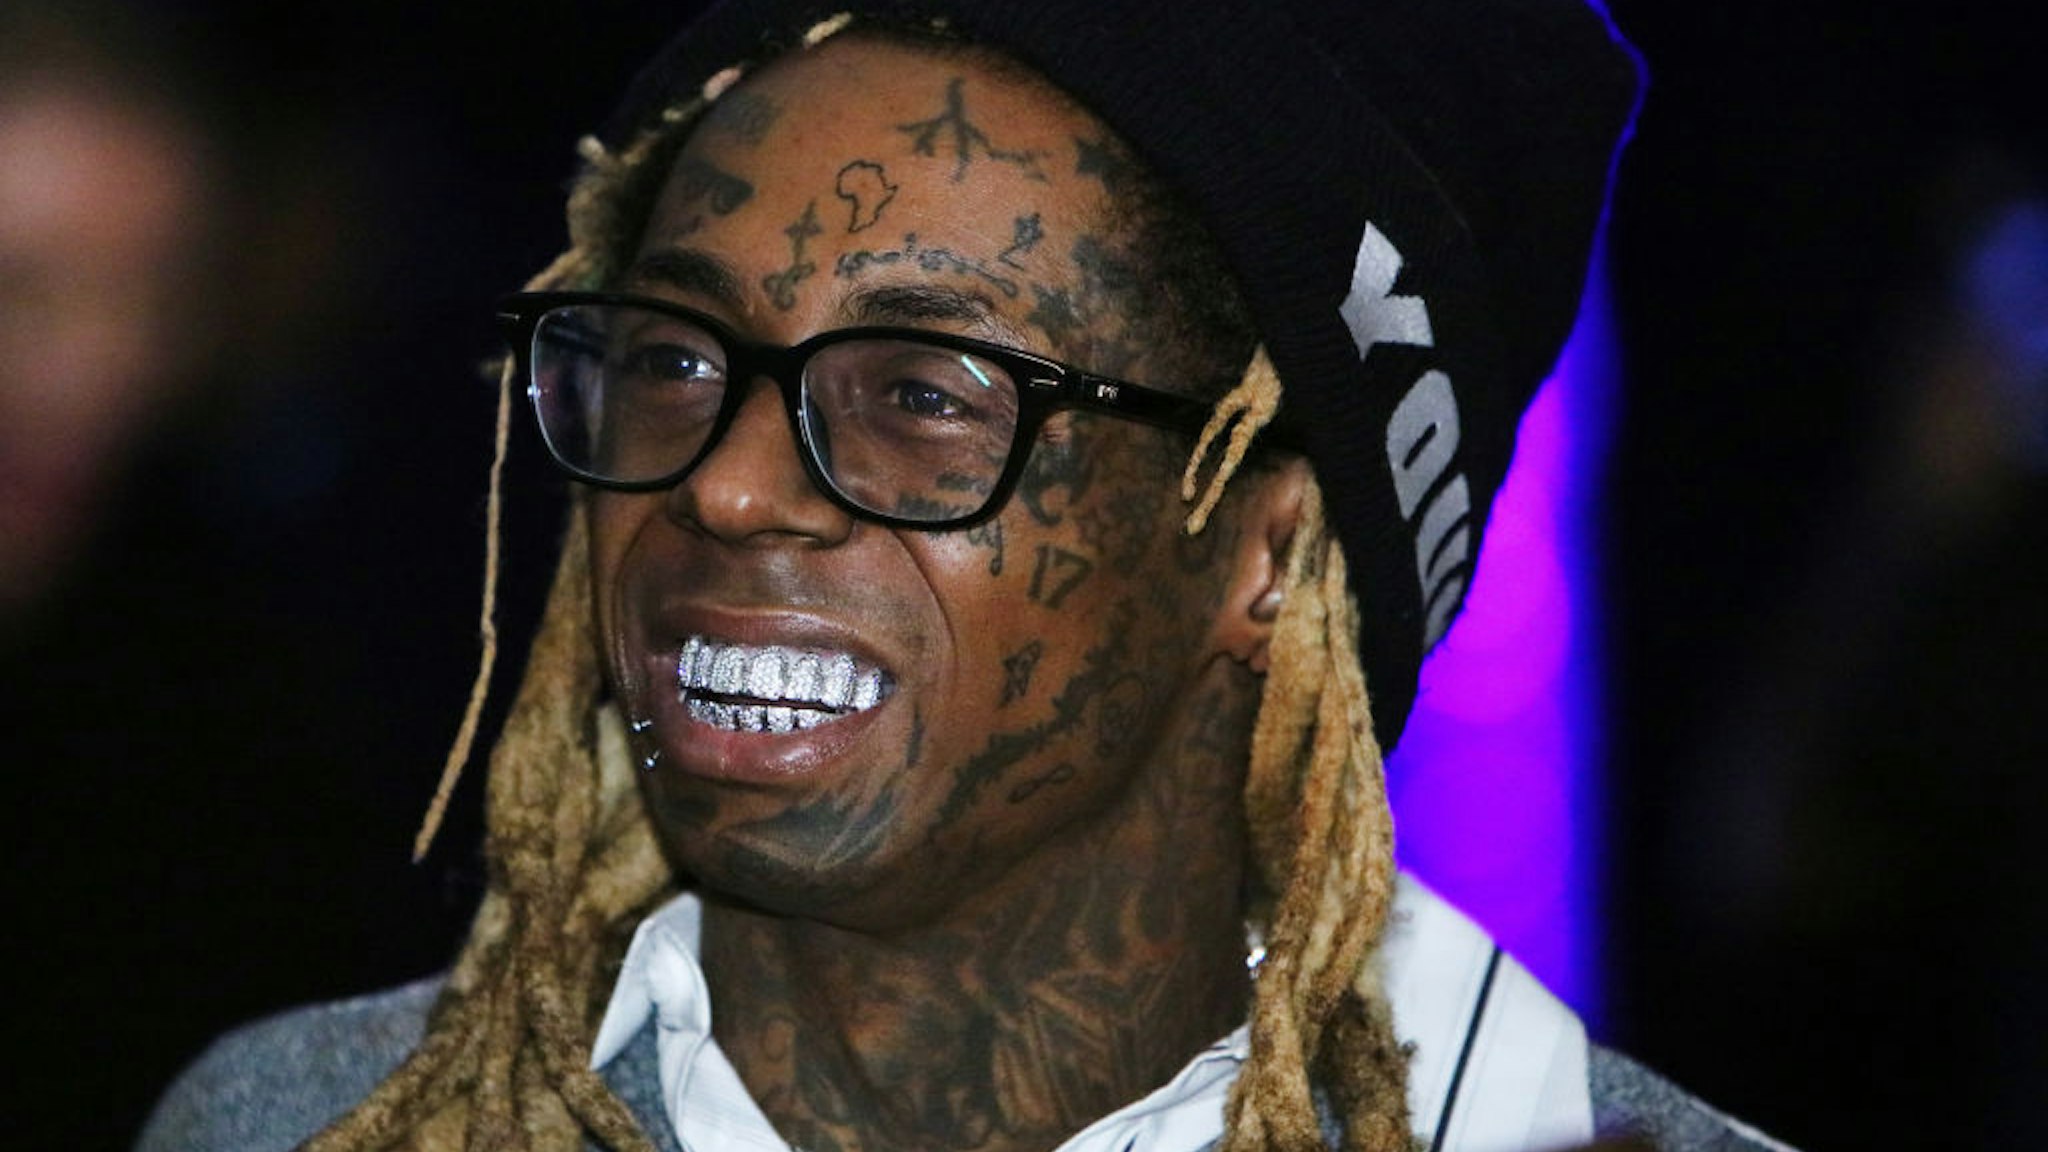 Lil Wayne attends Lil Wayne's "Funeral" album release party on February 01, 2020 in Miami, Florida.